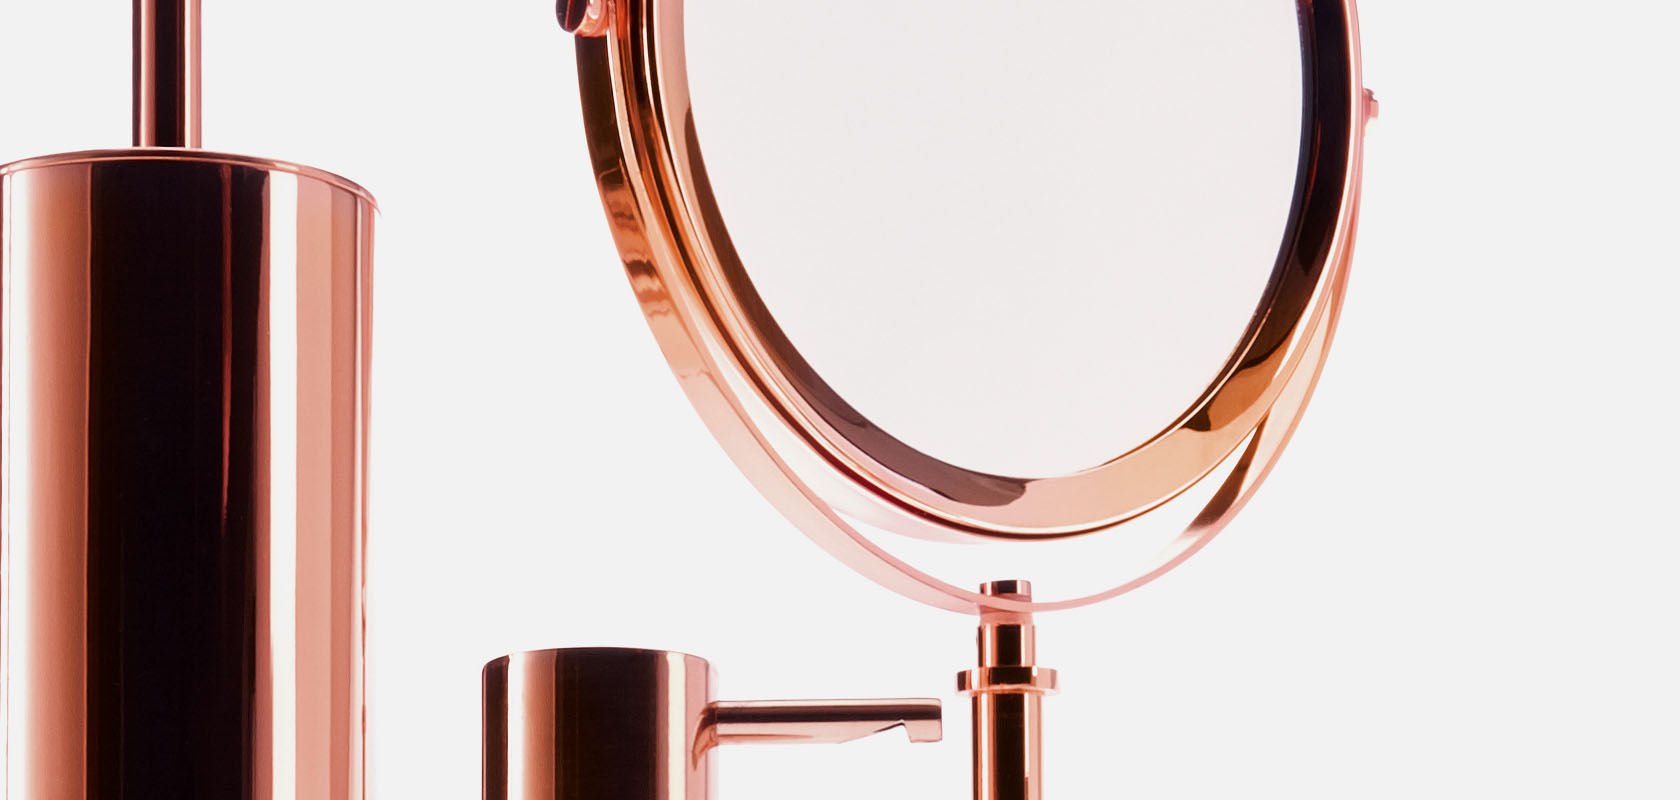 Rose Gold Wall Light by Decor Walther - |VESIMI Design| Luxury Bathrooms and Home Decor